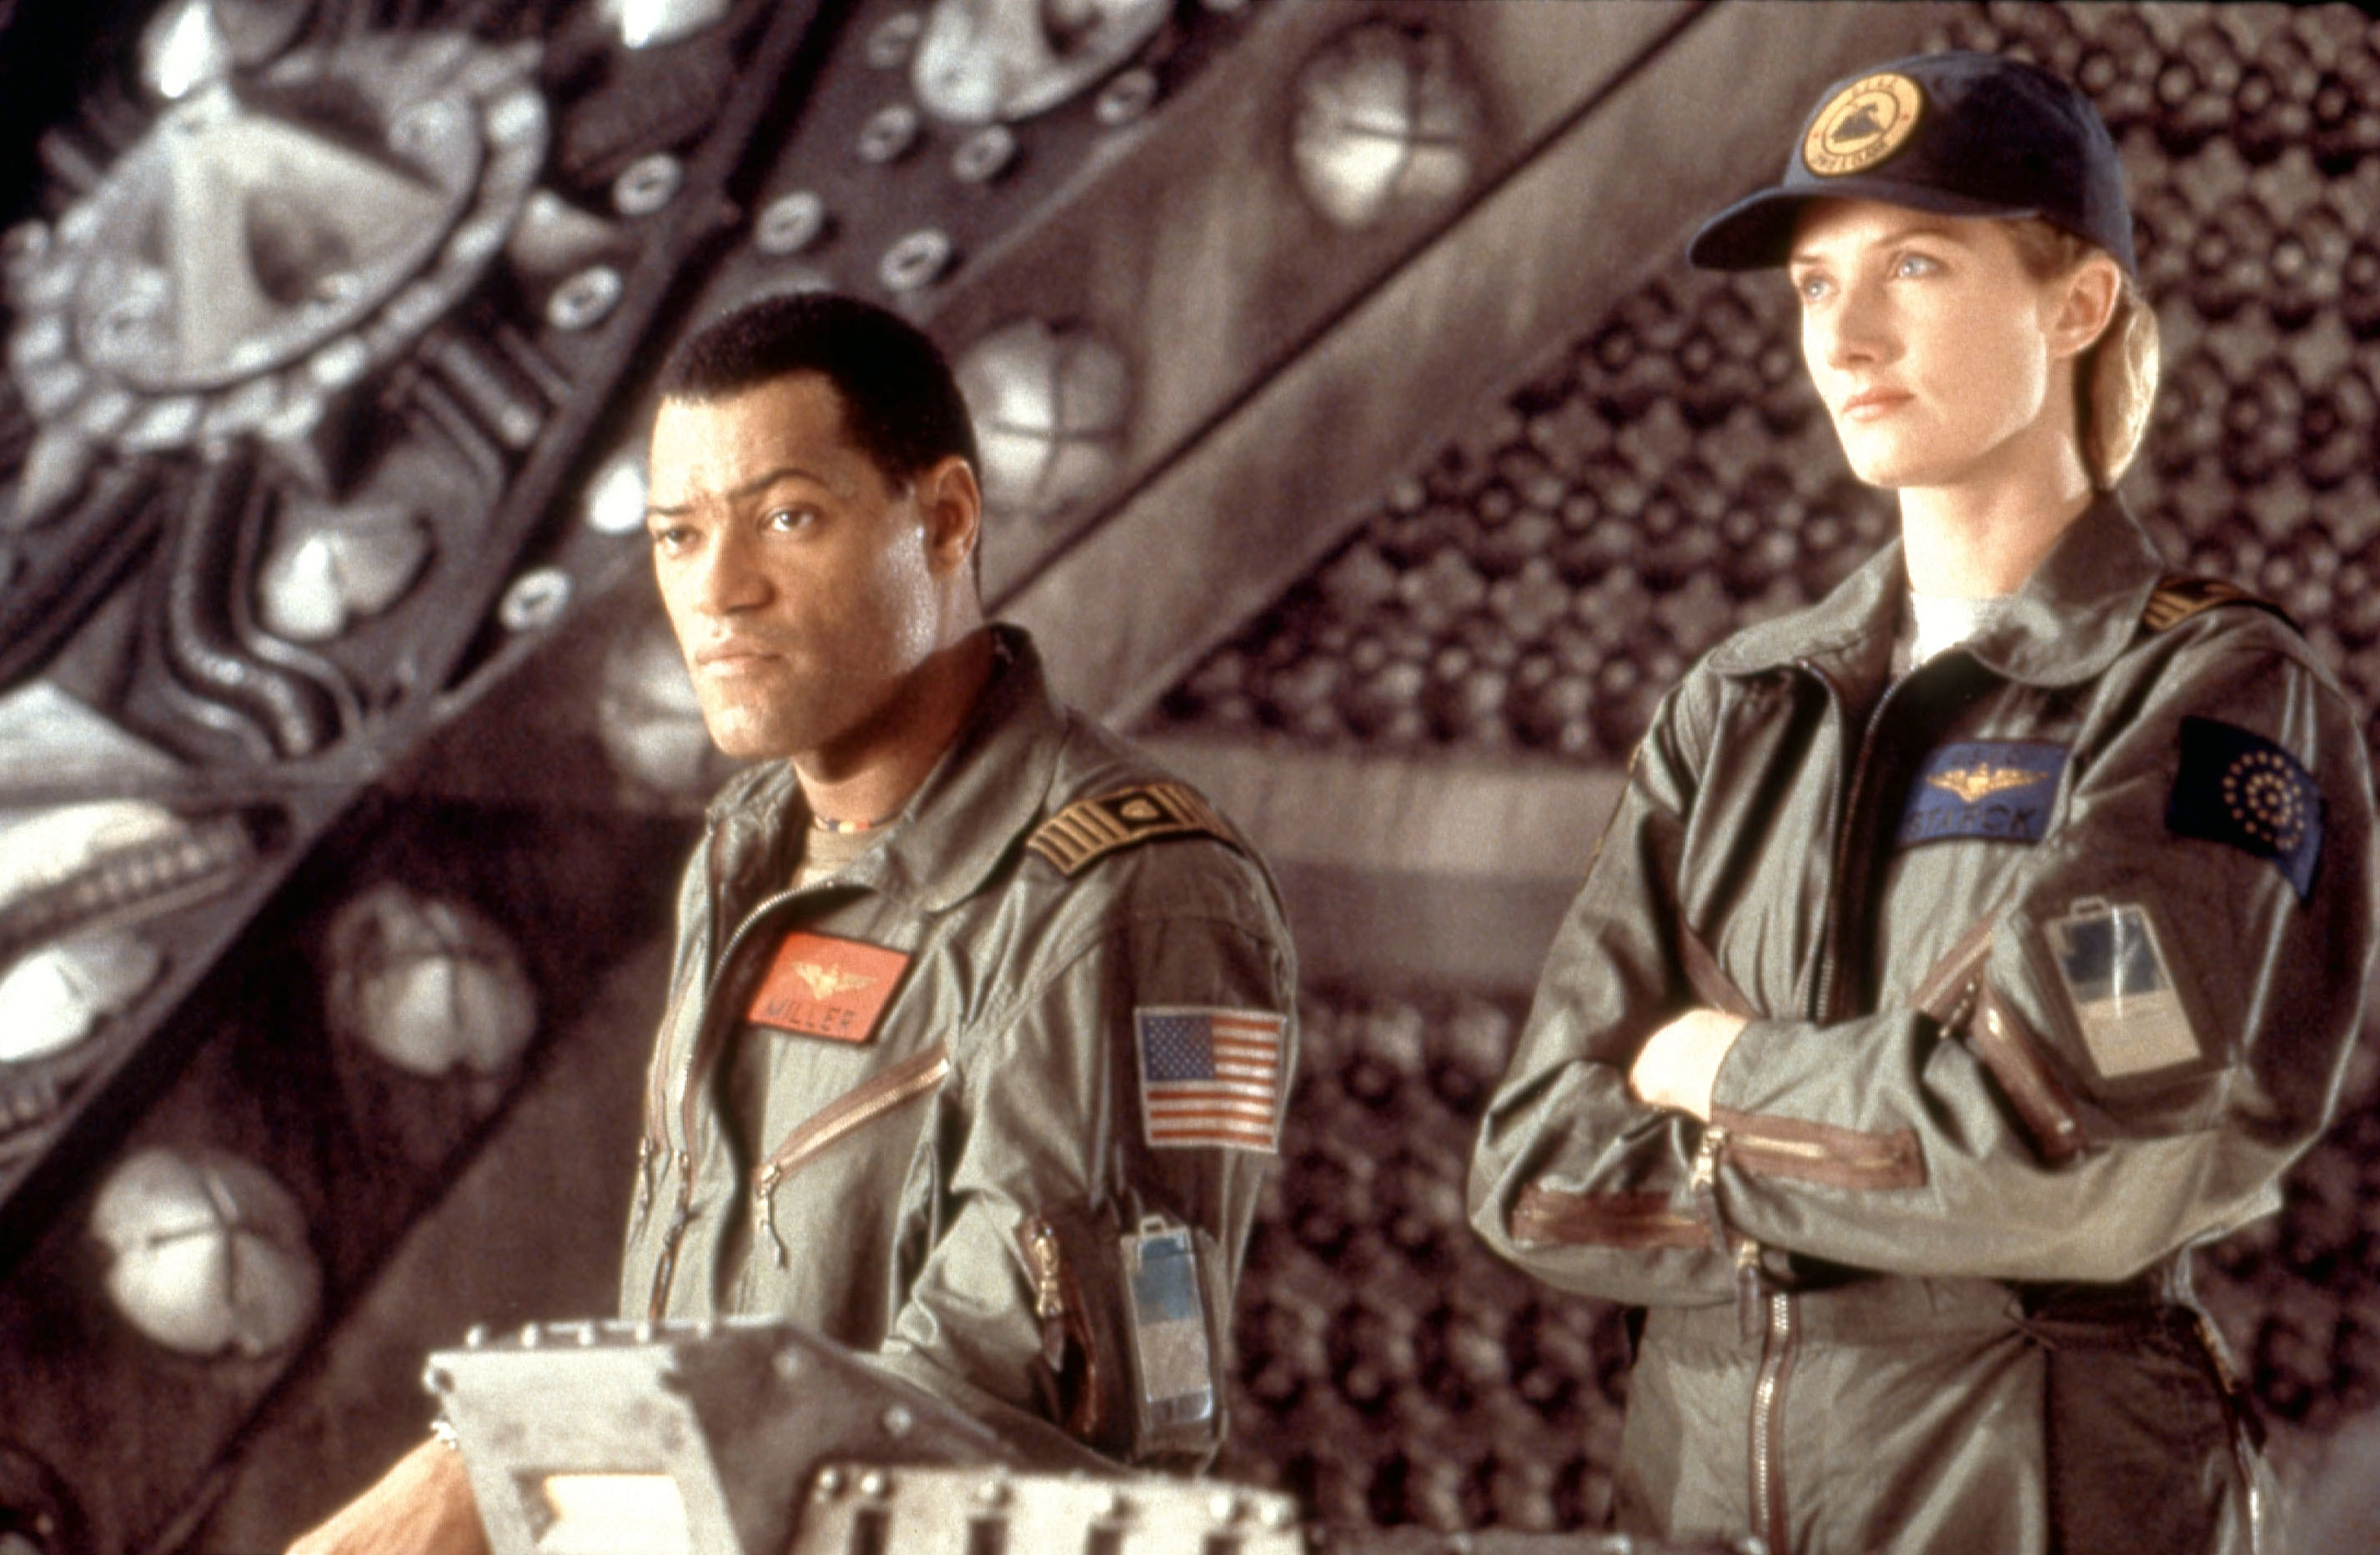 Miller (Laurence Fishburne) and Starck (Joely Richardson) in &quot;Event Horizon&quot;